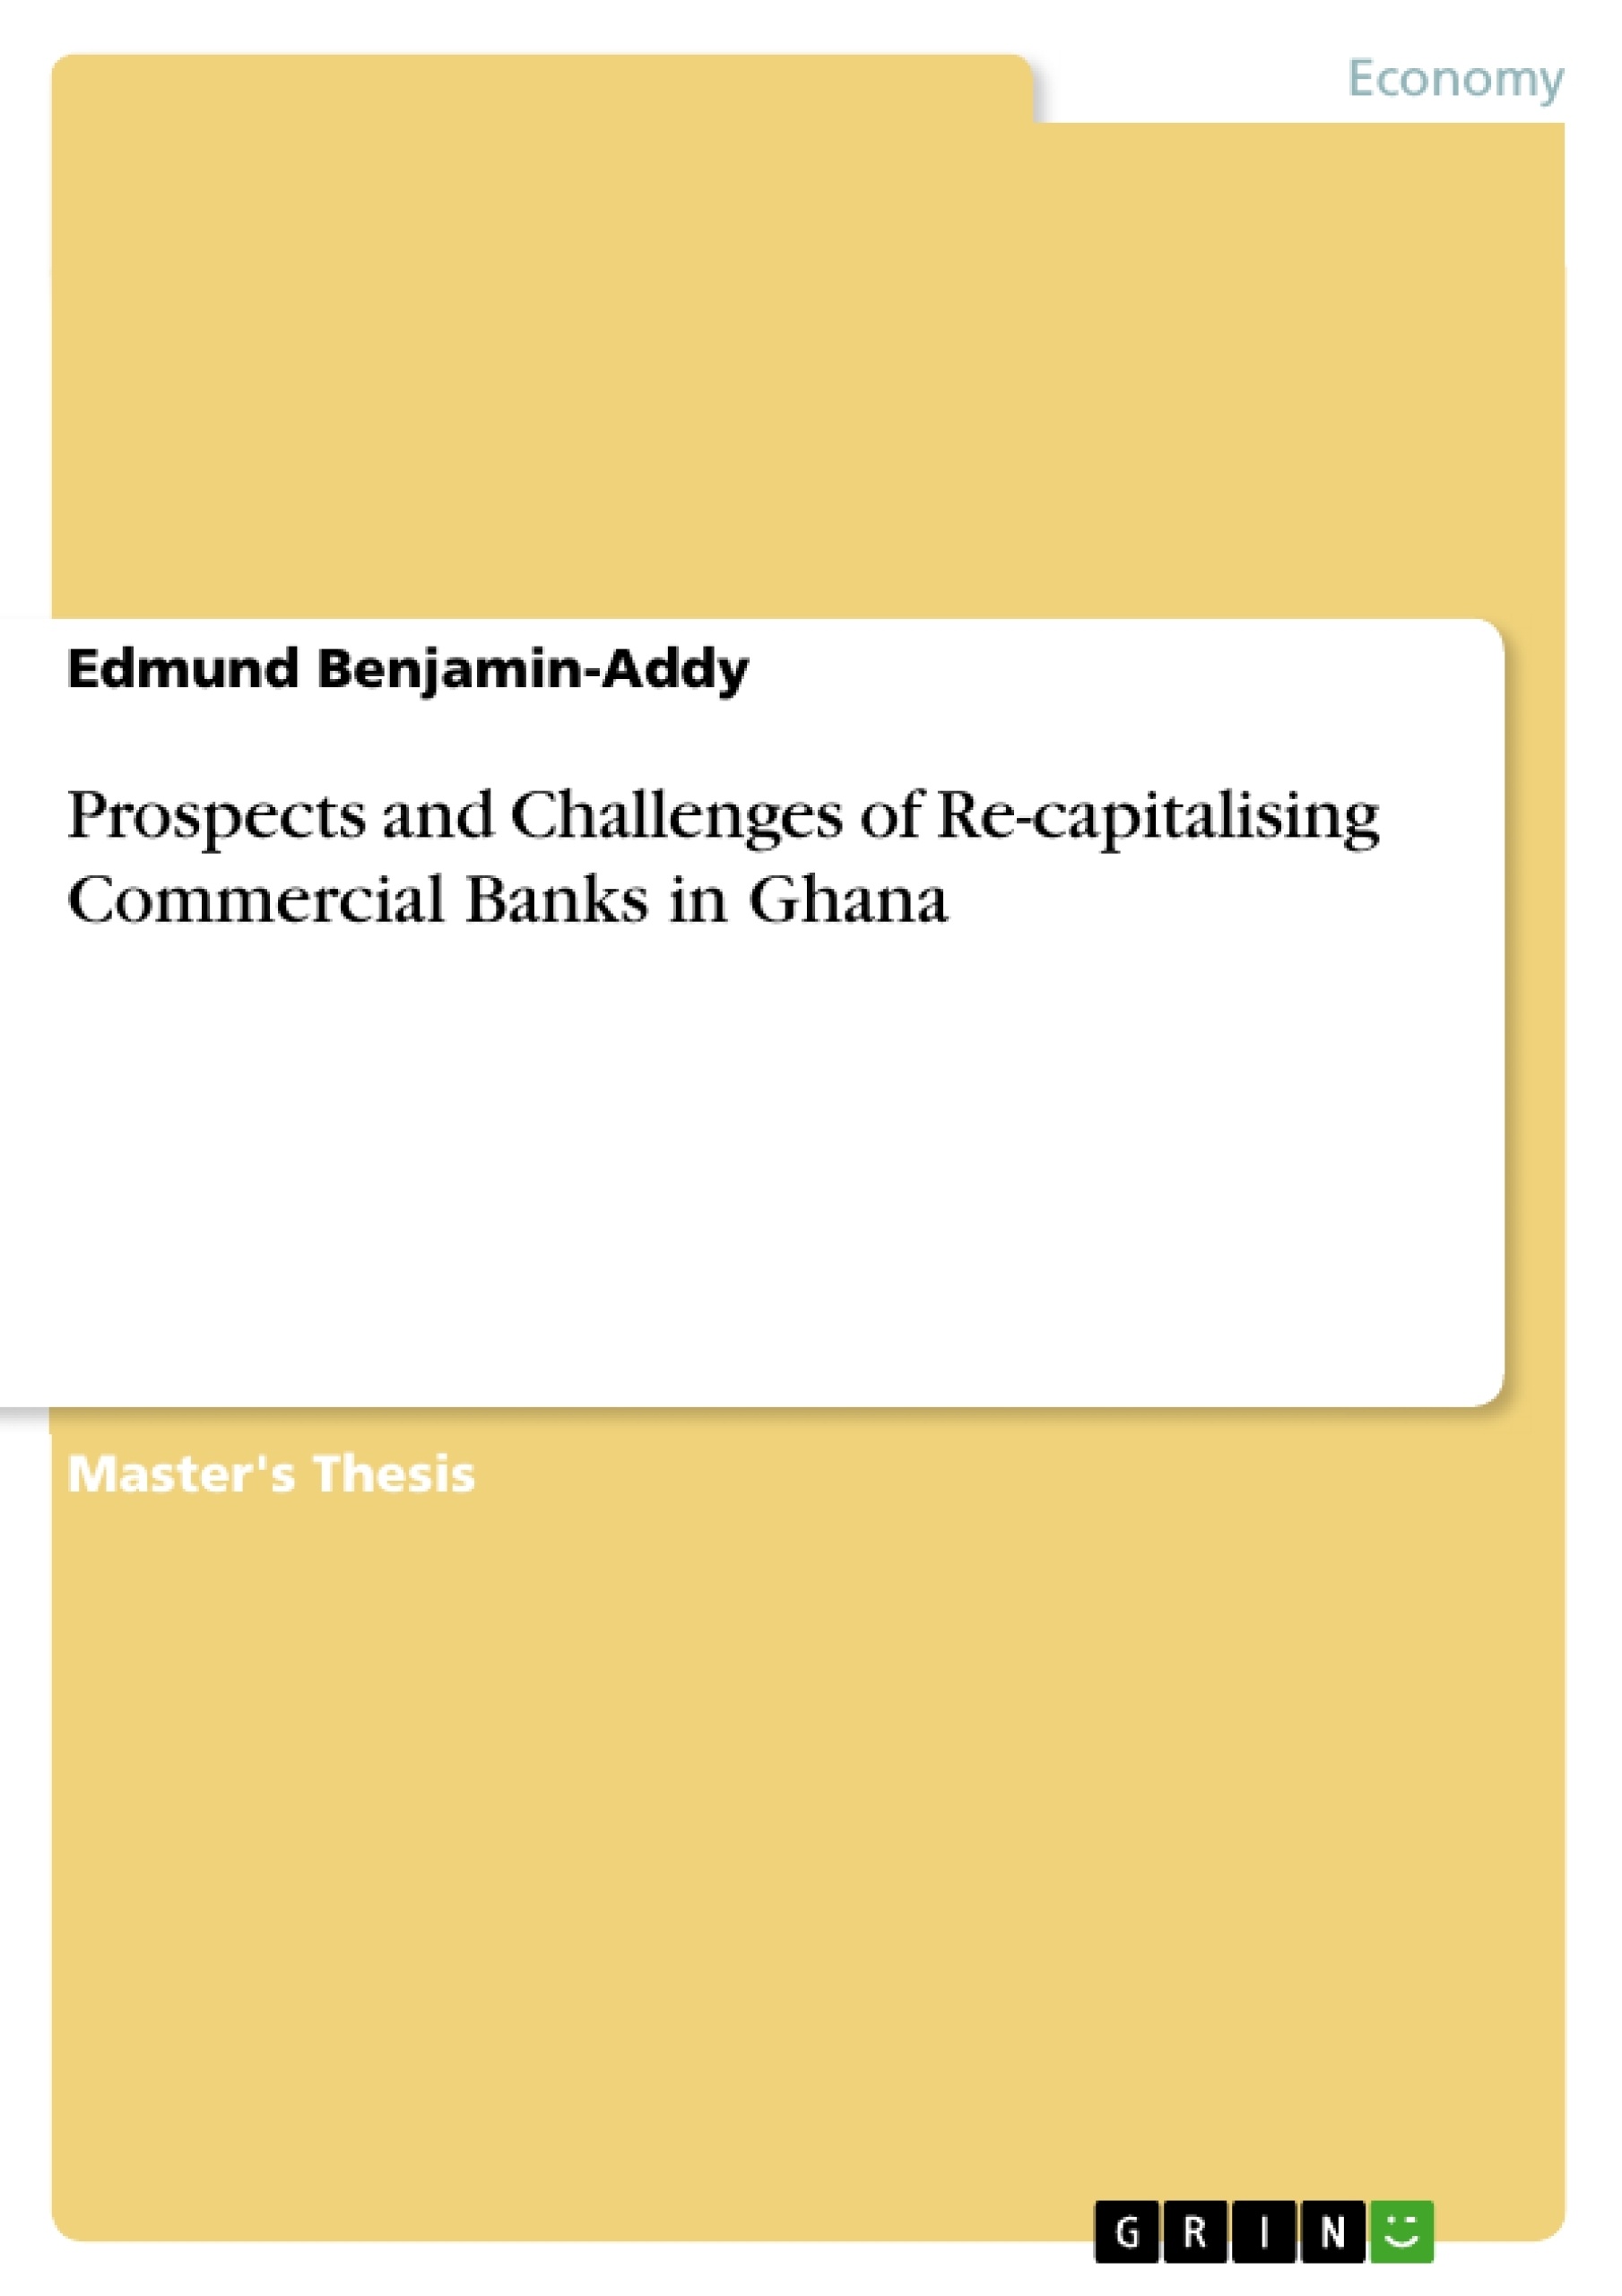 Title: Prospects and Challenges of Re-capitalising Commercial Banks in Ghana